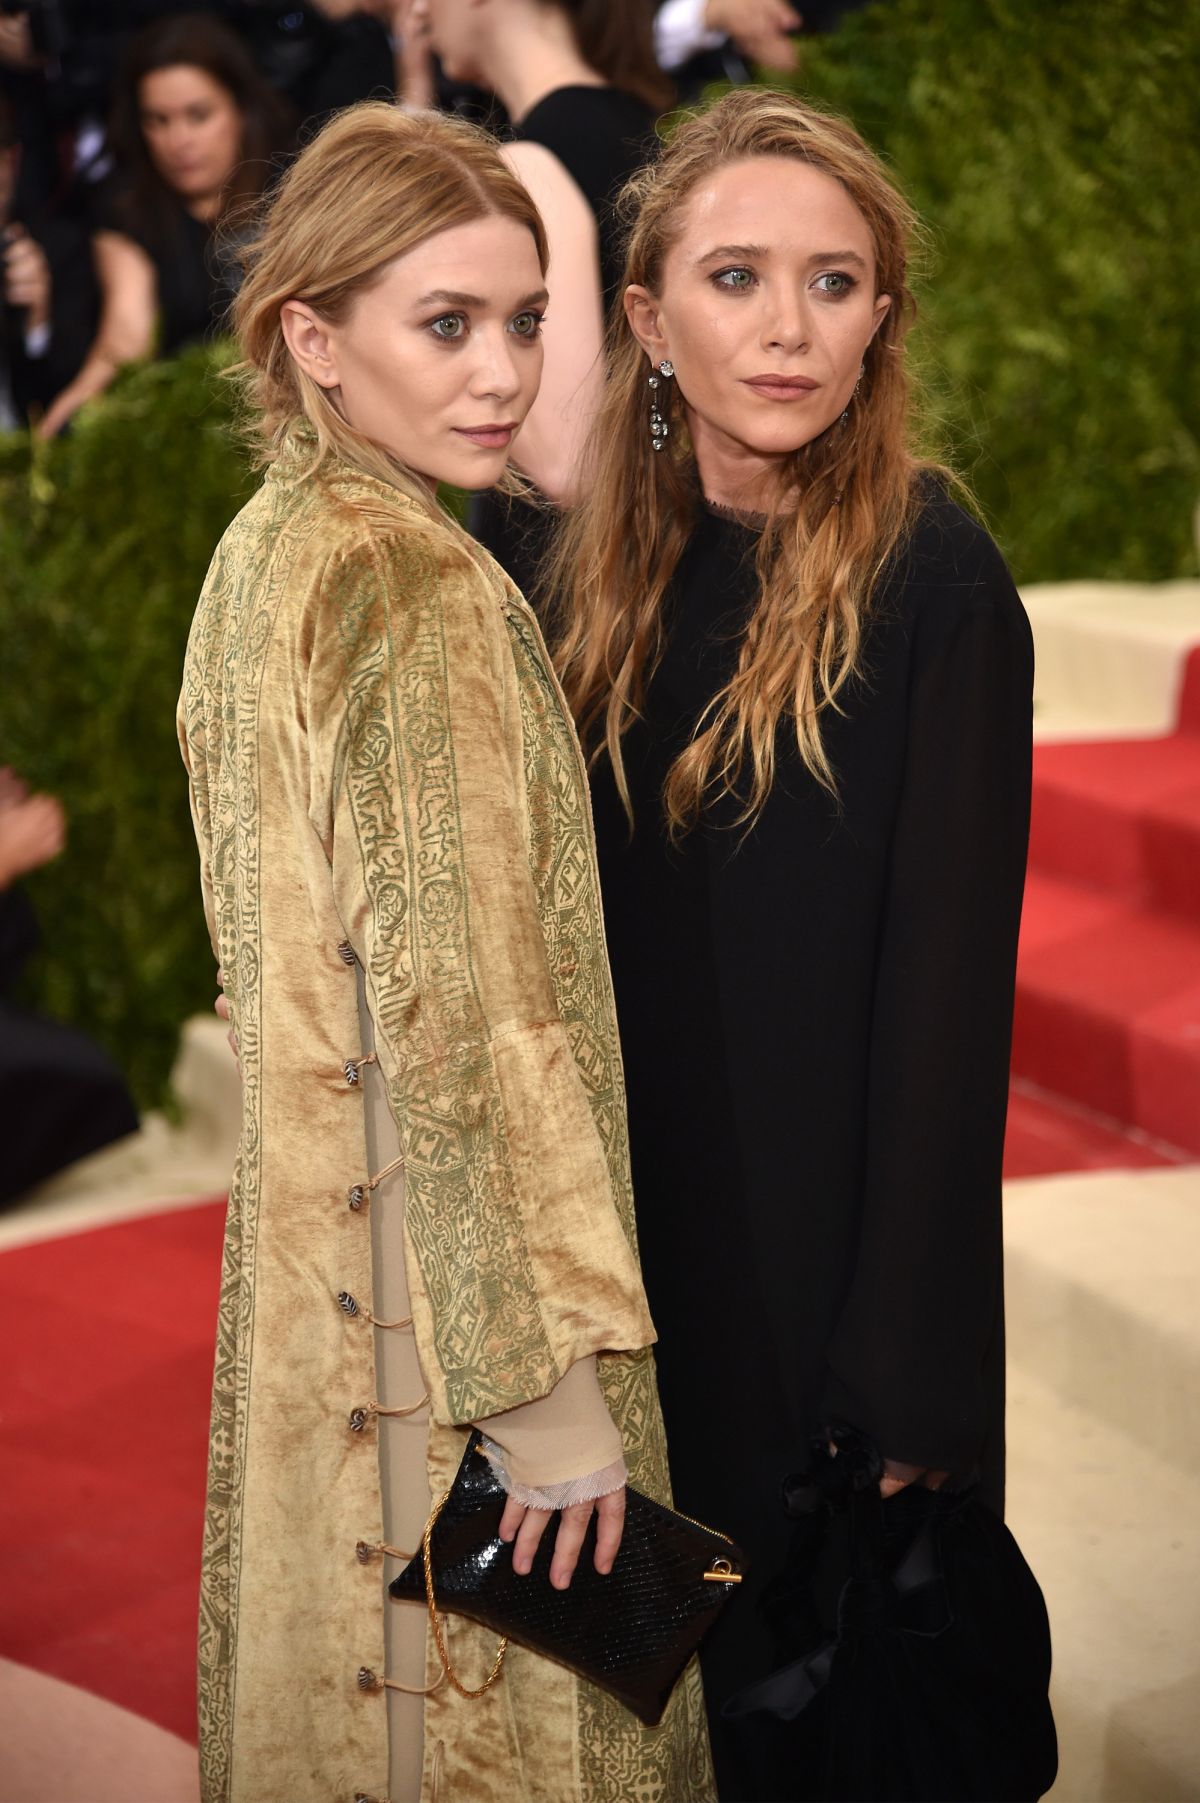 MARY-KATE and ASHLEY OLSEN at Costume Institute Gala 2016 in New York ...